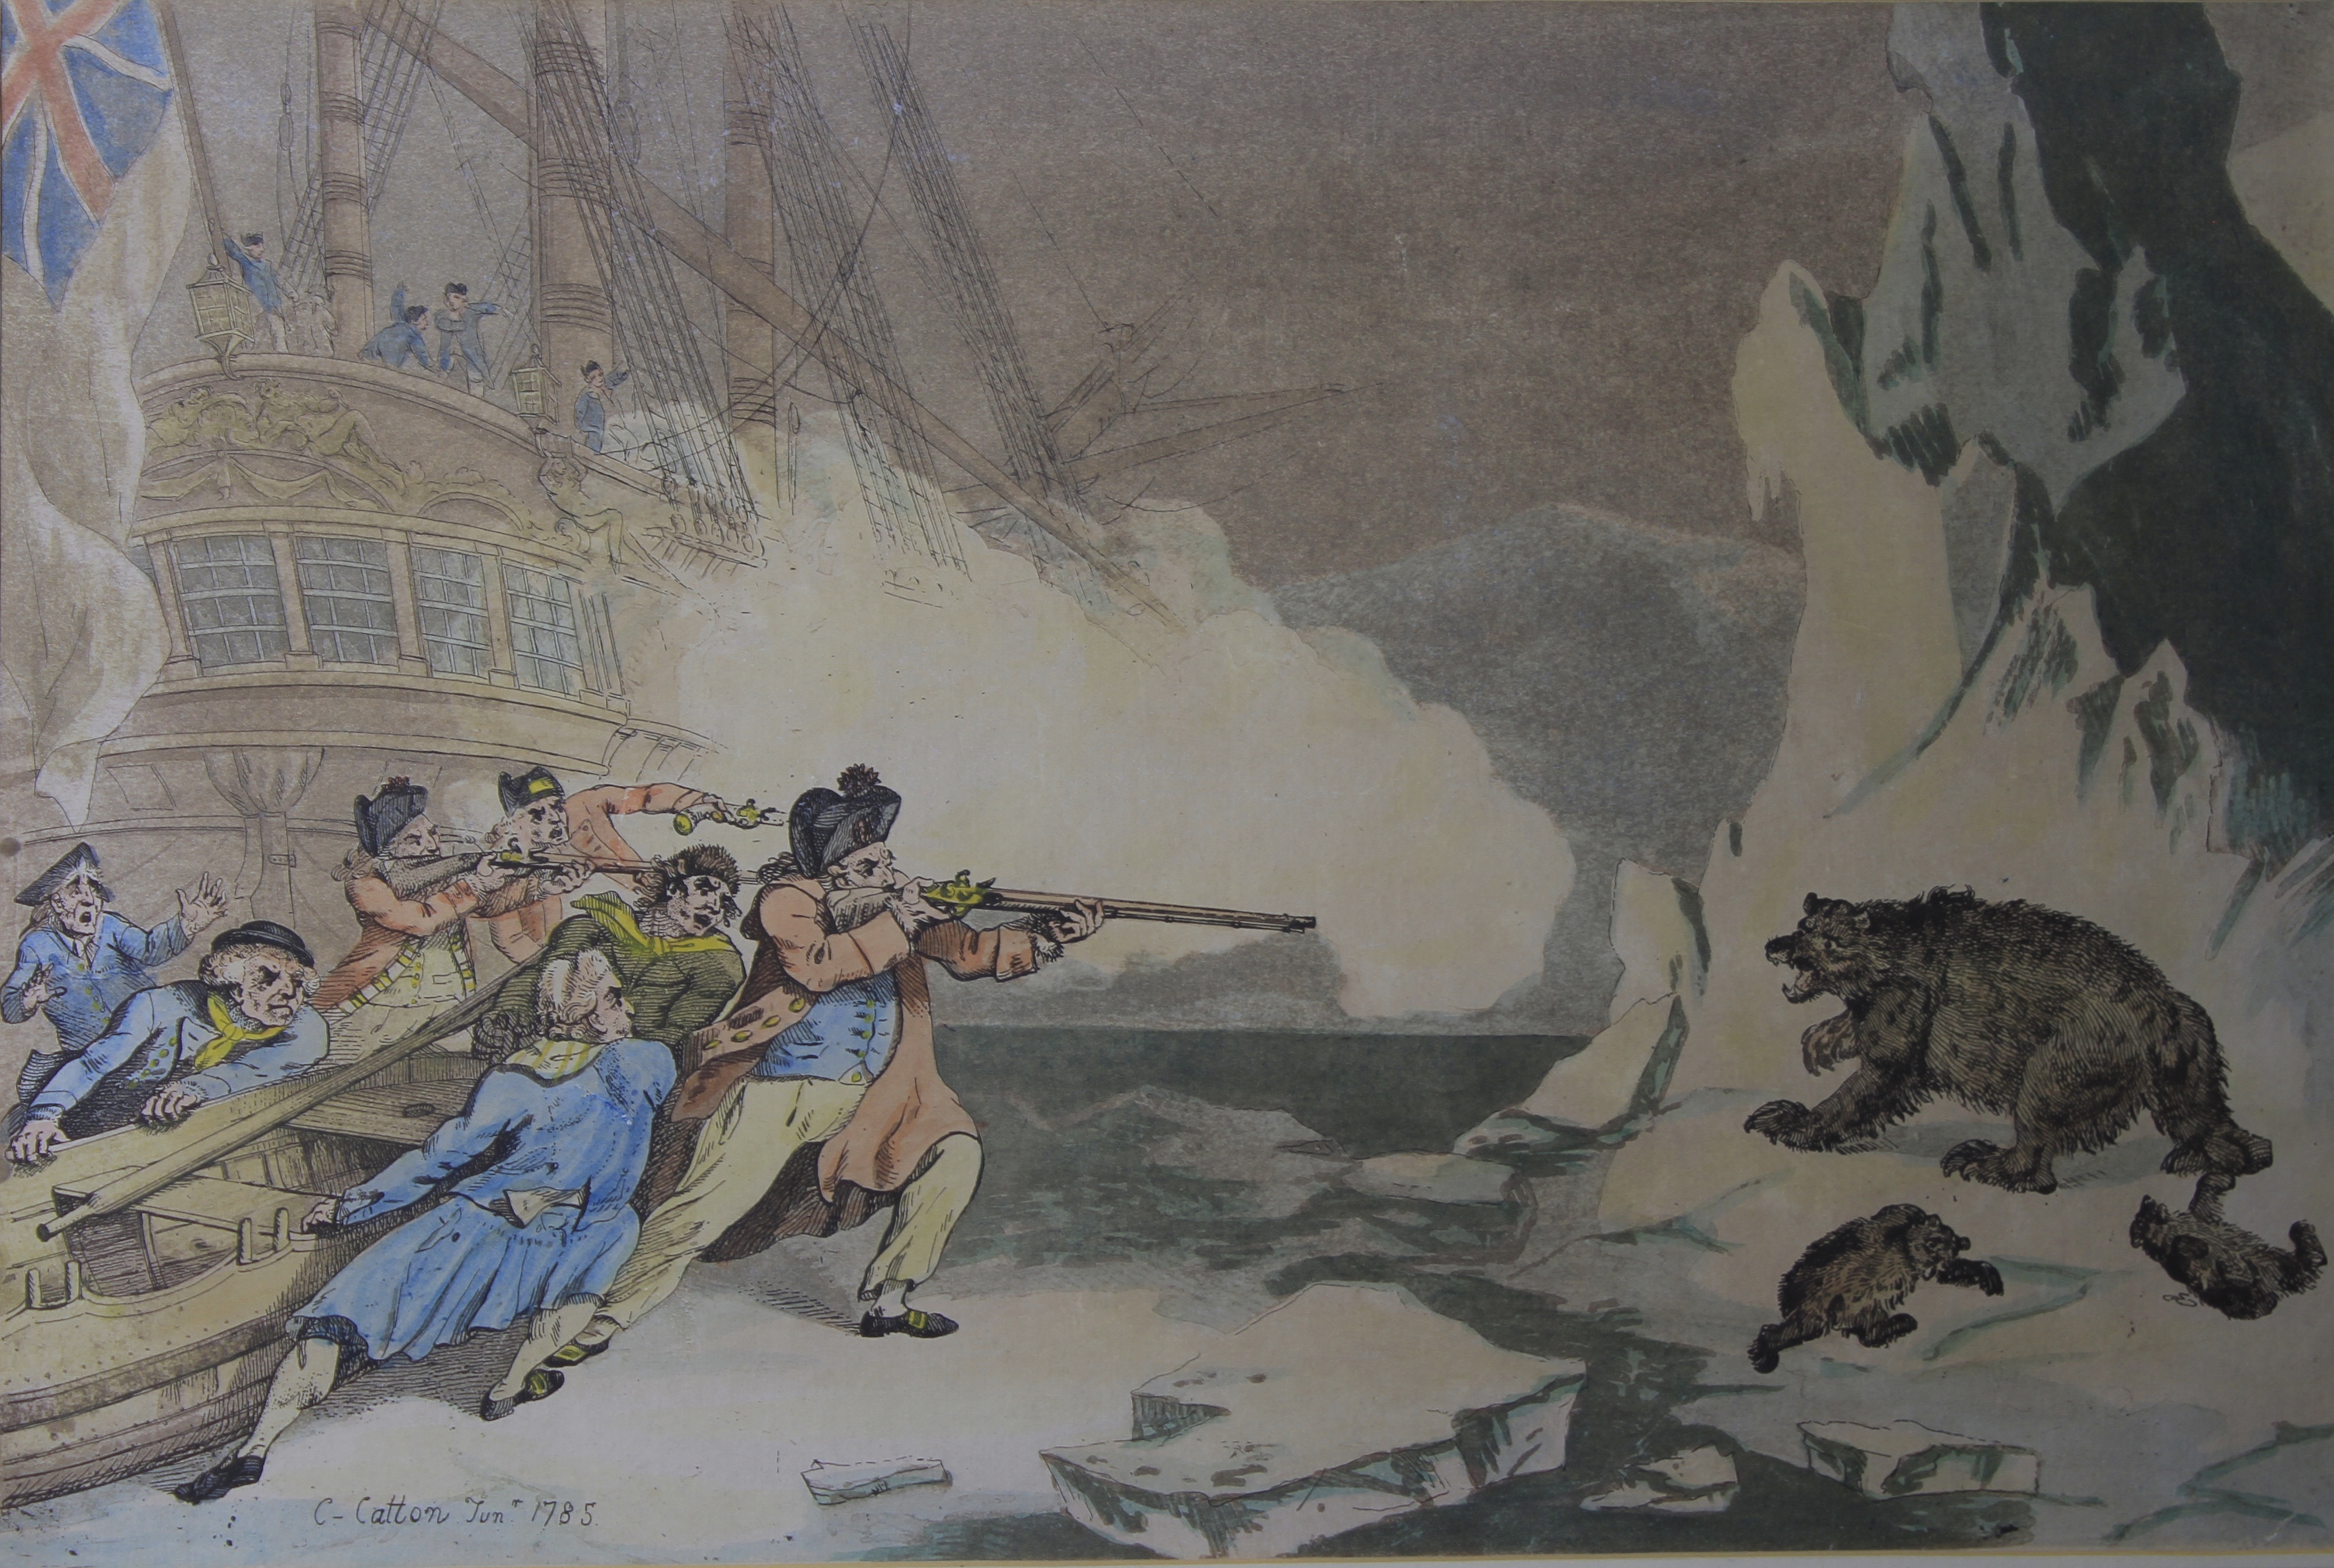 Charles Catton Jnr (1756-1819), "The Margate Hoy" and a polar scene with sailors firing from a